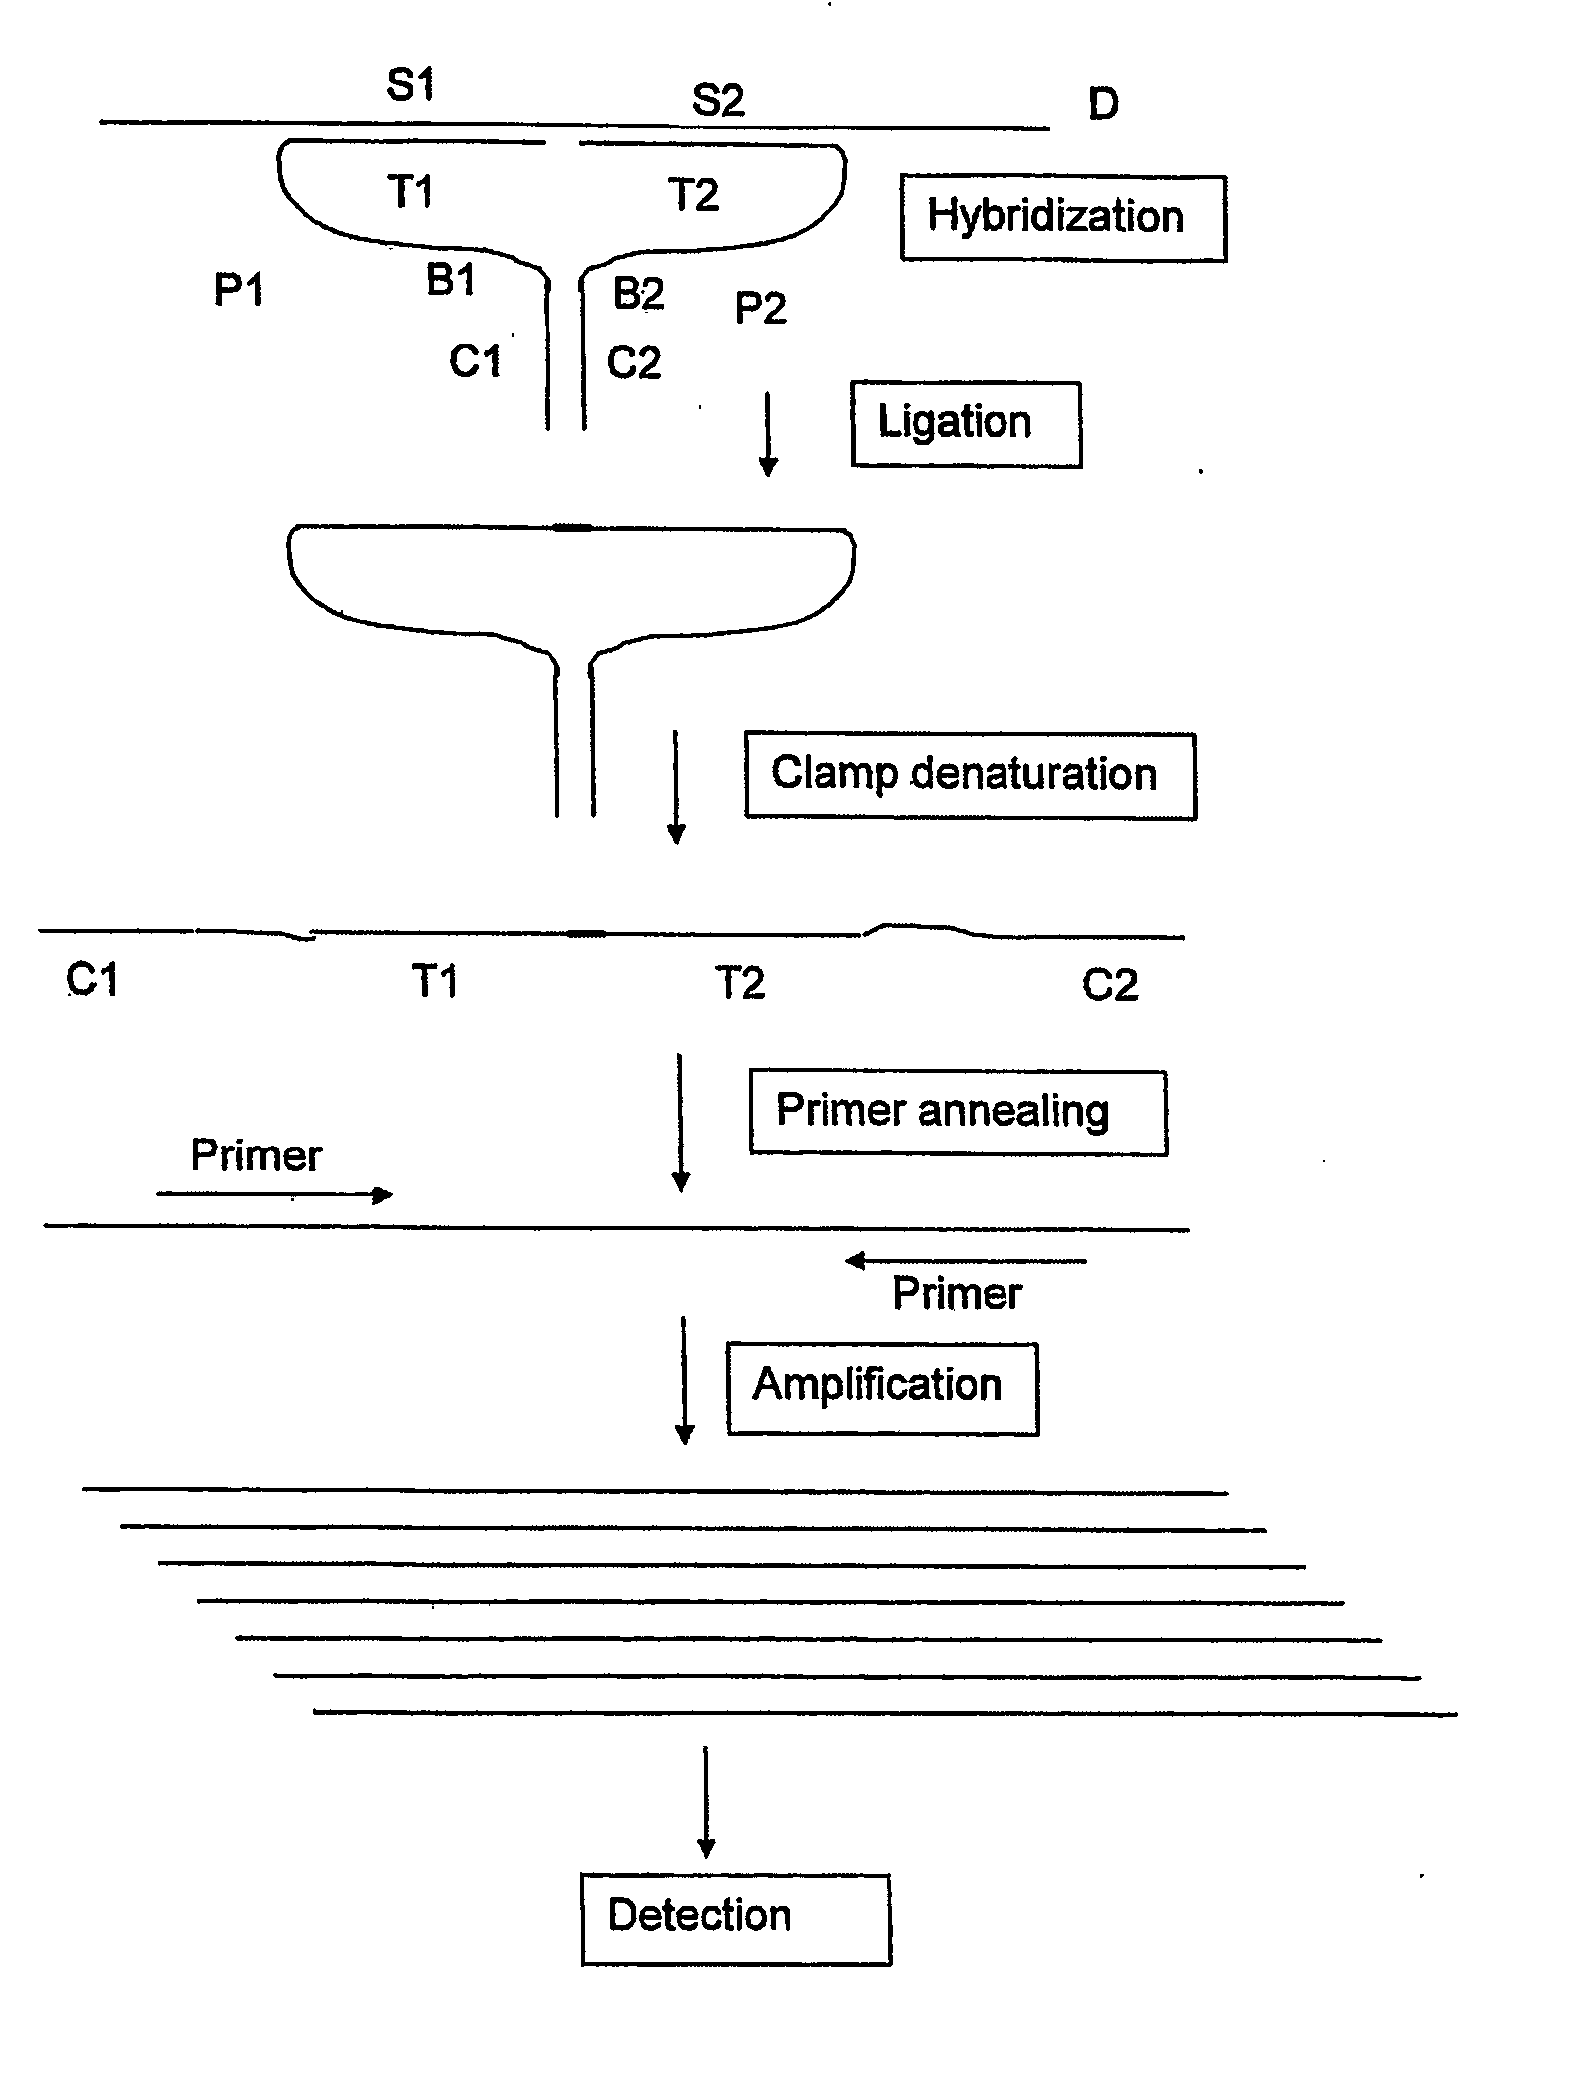 Means and Method for the Detection of Target Nucleotide Sequences Using Ligation Assays With Improved Oligonucleotide Probe Pairs